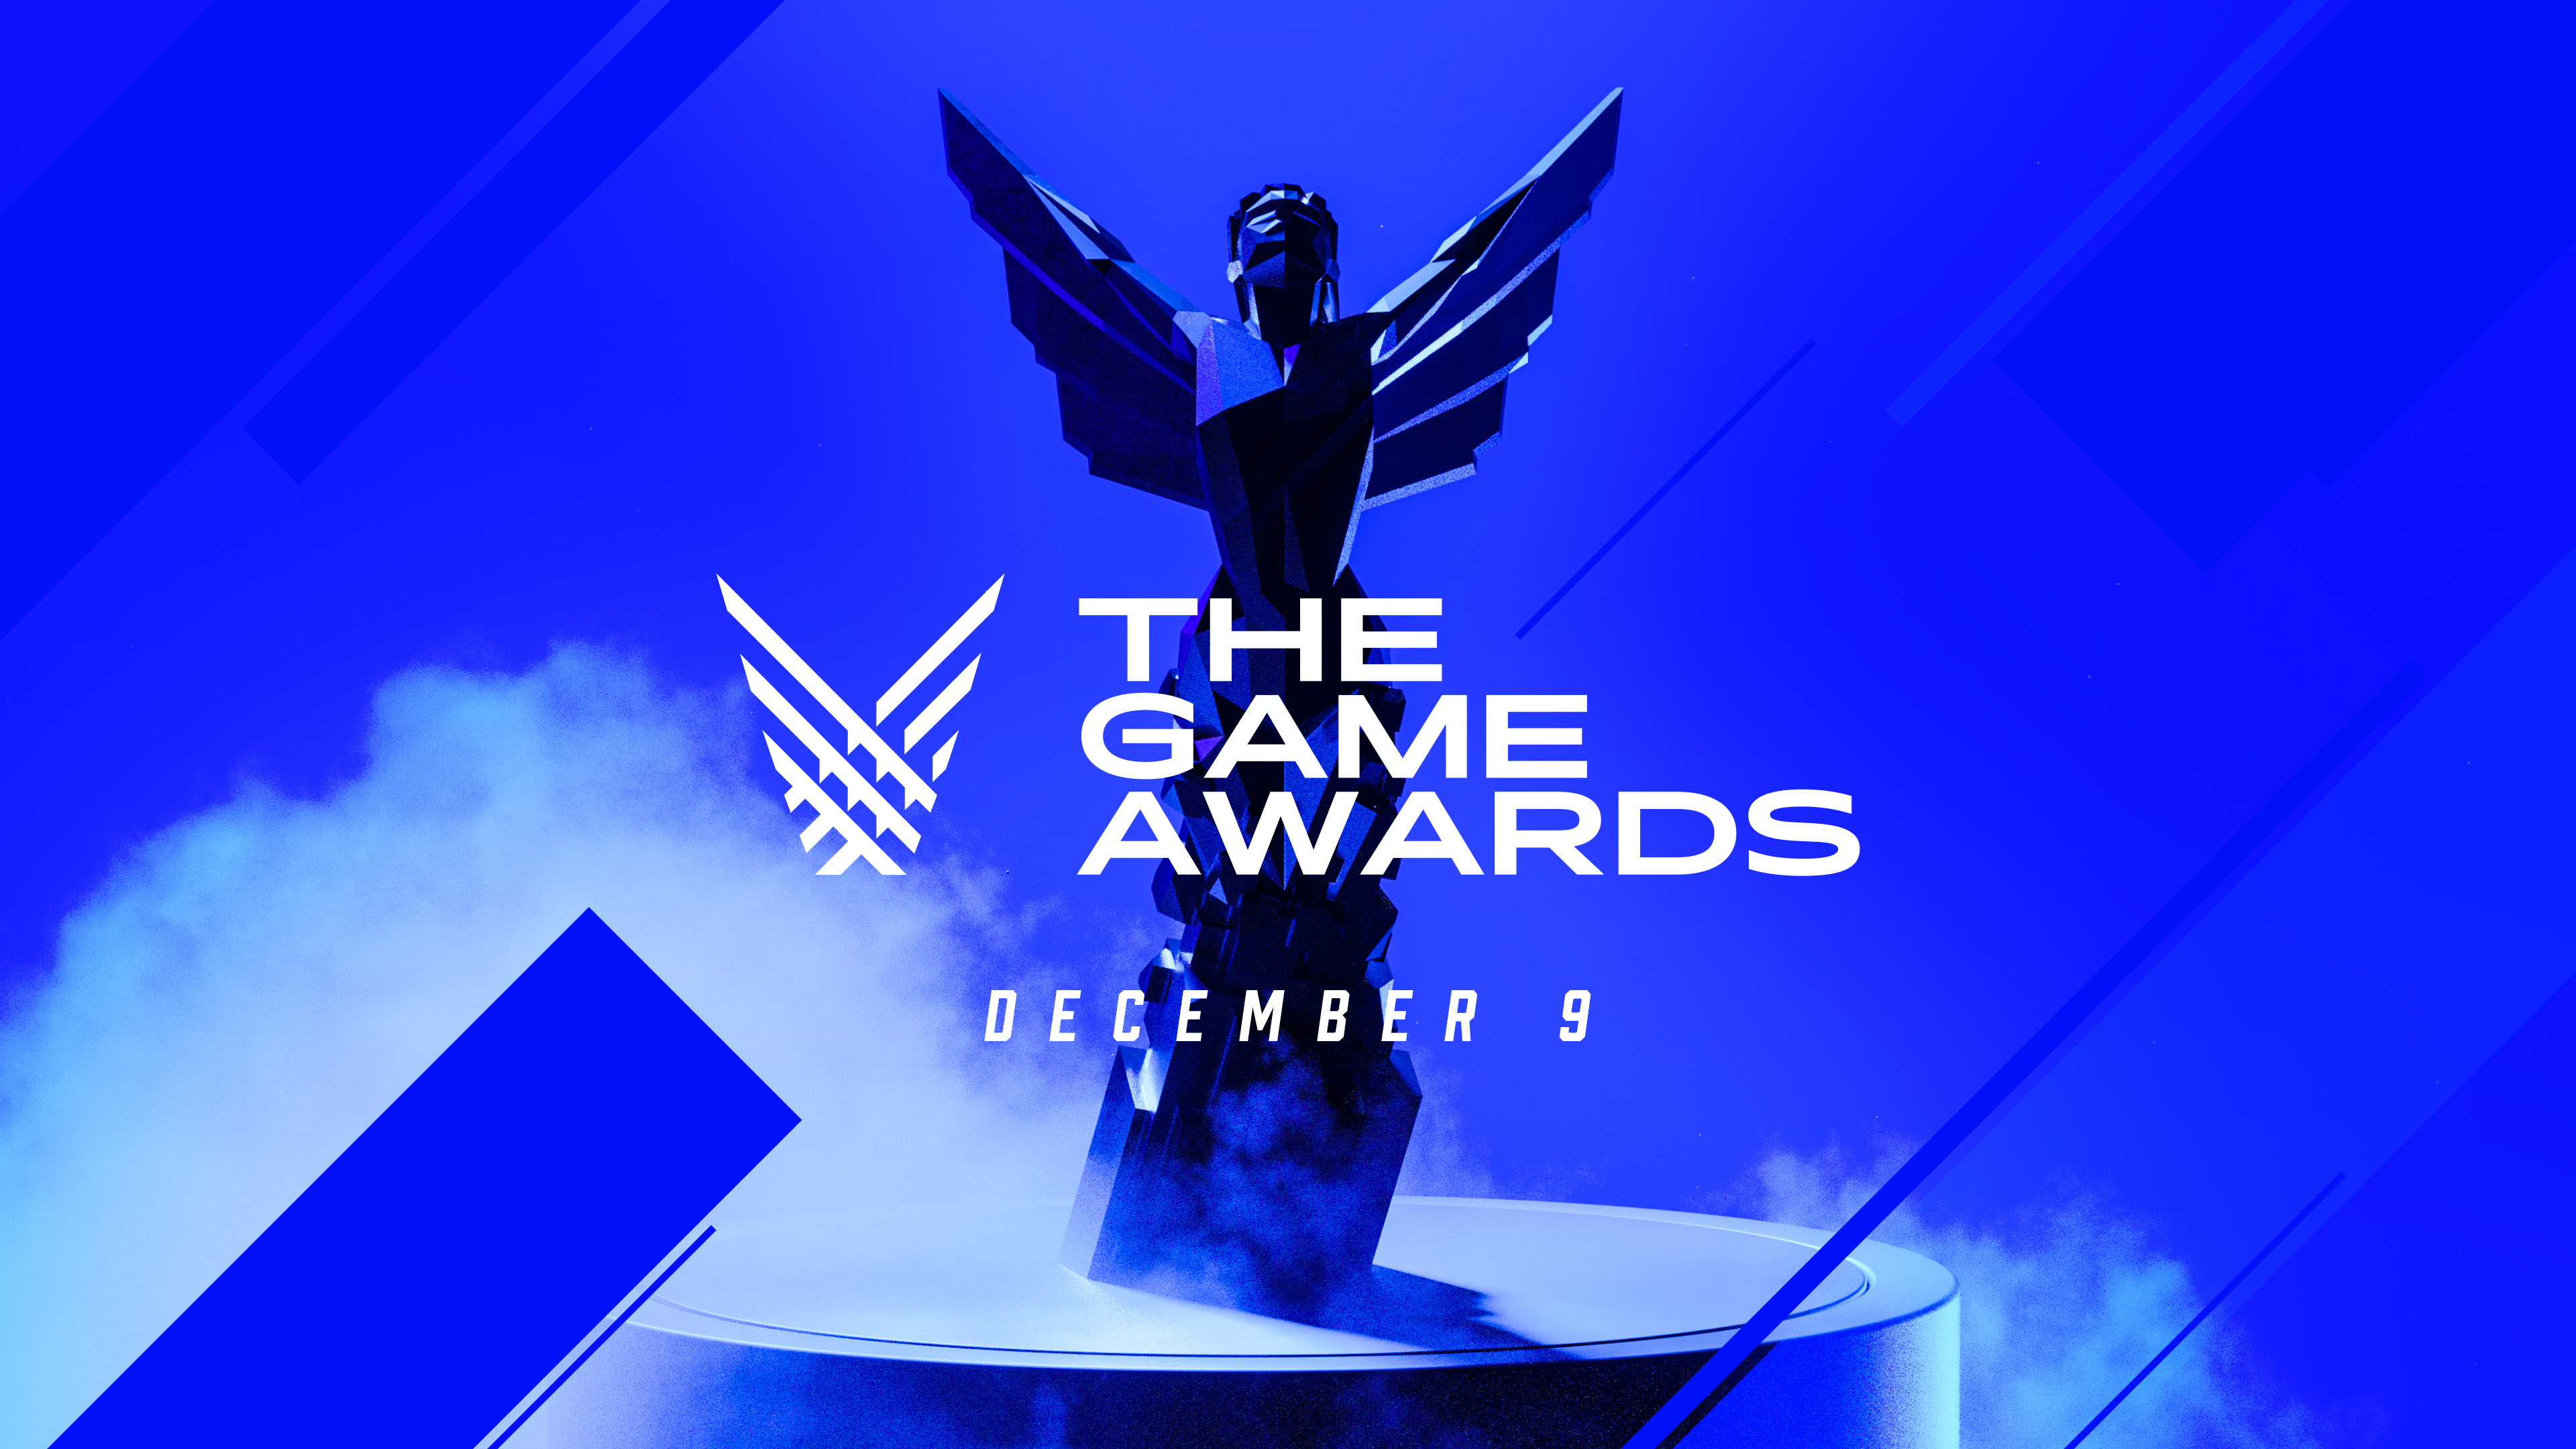 No NFT In Upcoming Game Awards, Soon NFT Game Awards?